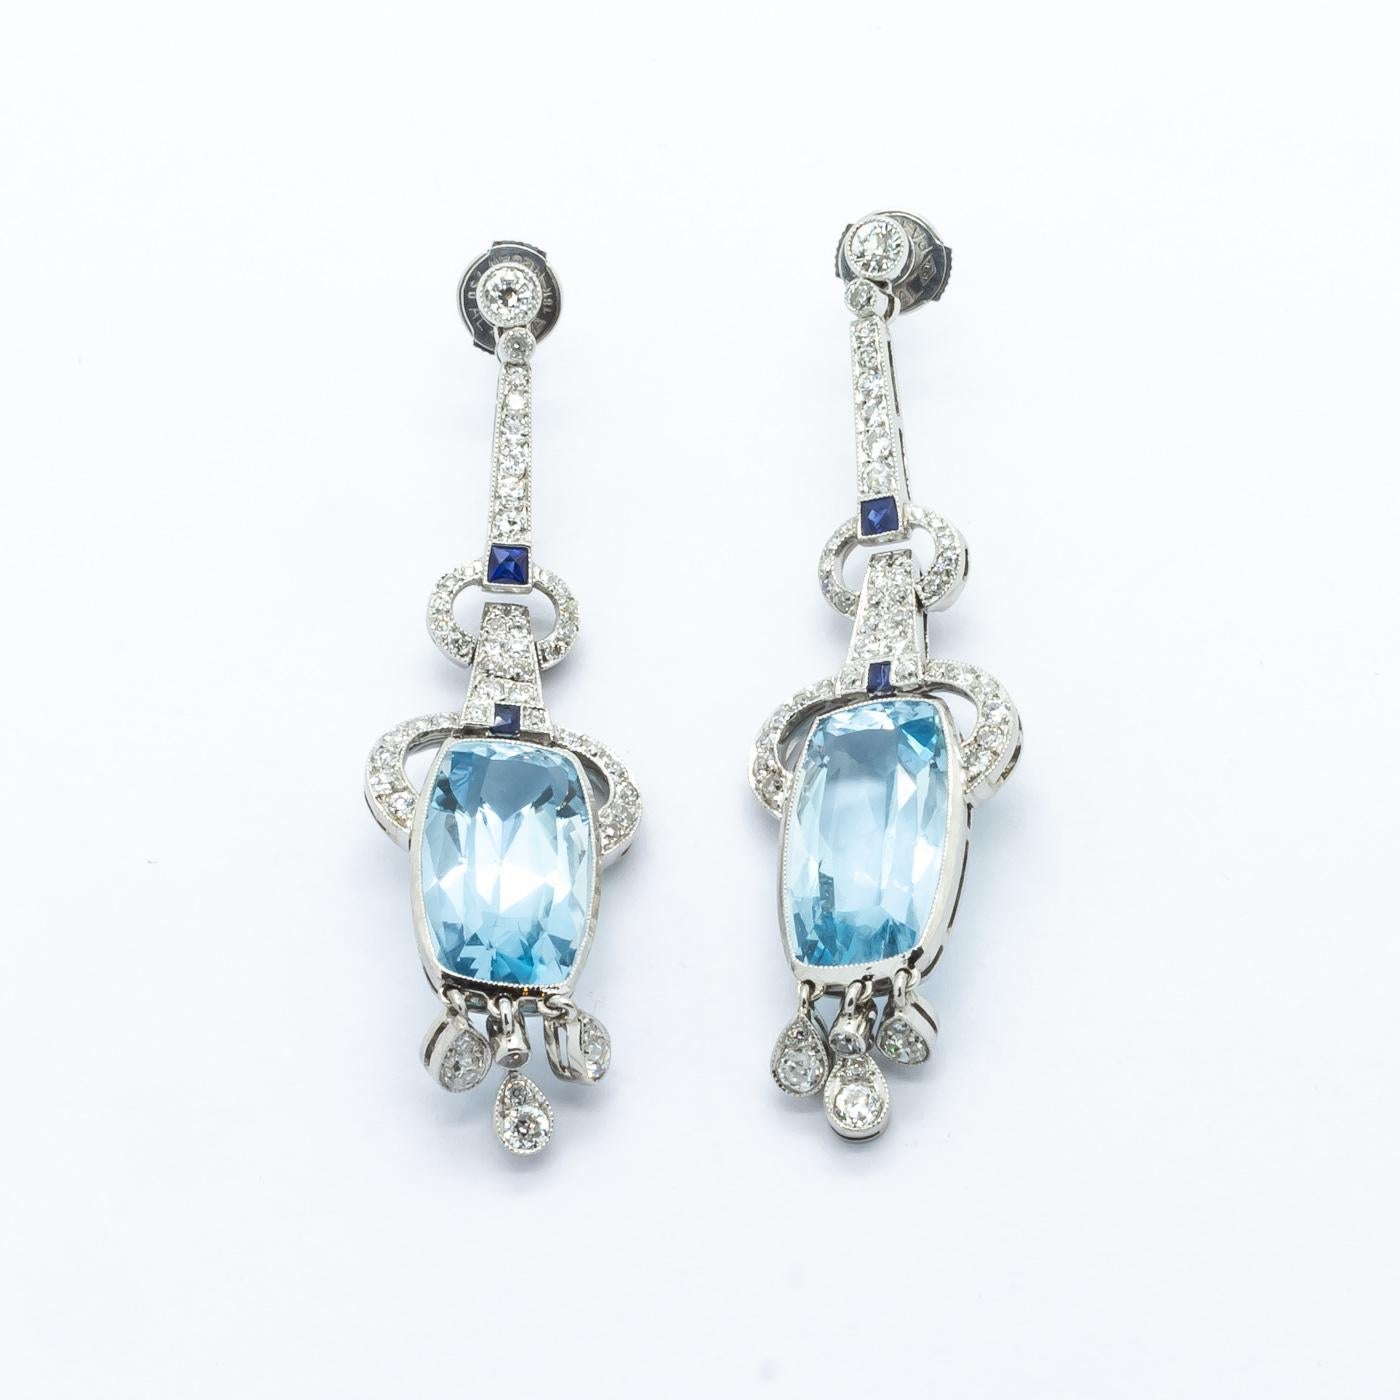 Modern Aquamarine, Sapphire, Diamond And Platinum Earrings In Excellent Condition For Sale In London, GB